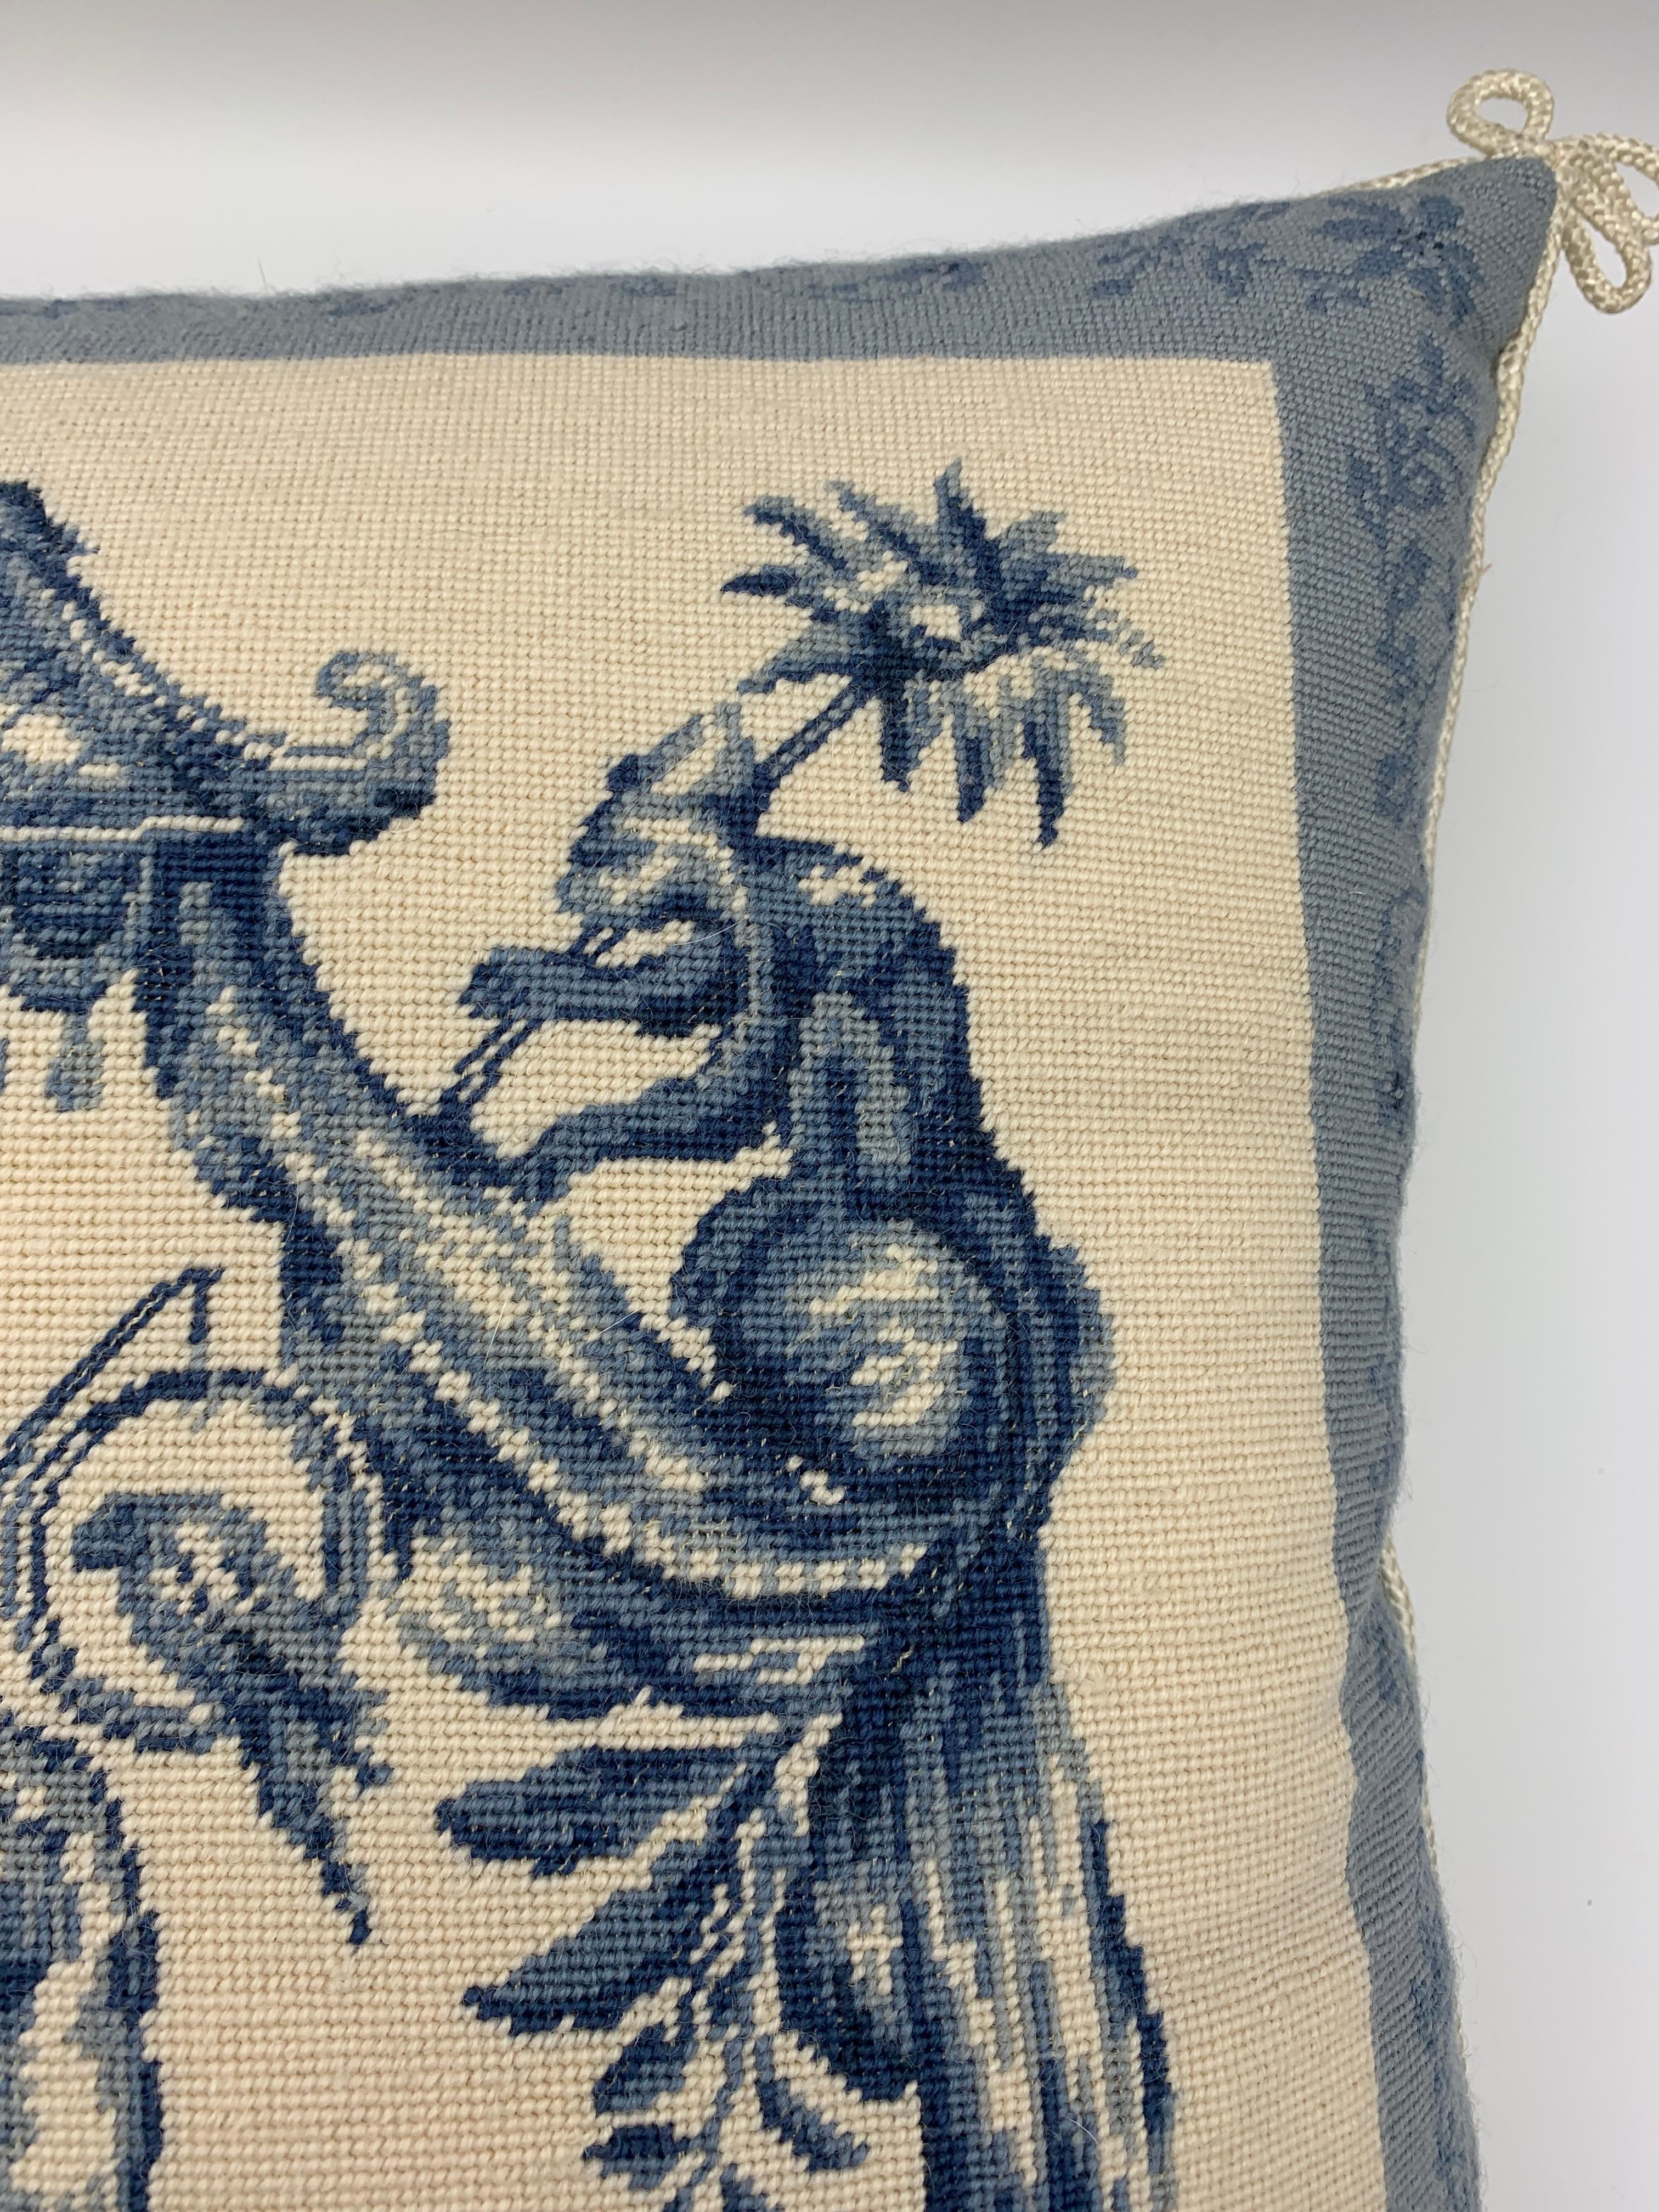 Chinoiserie Blue and White Pagoda Needlepoint Pillow, 1970s For Sale 4